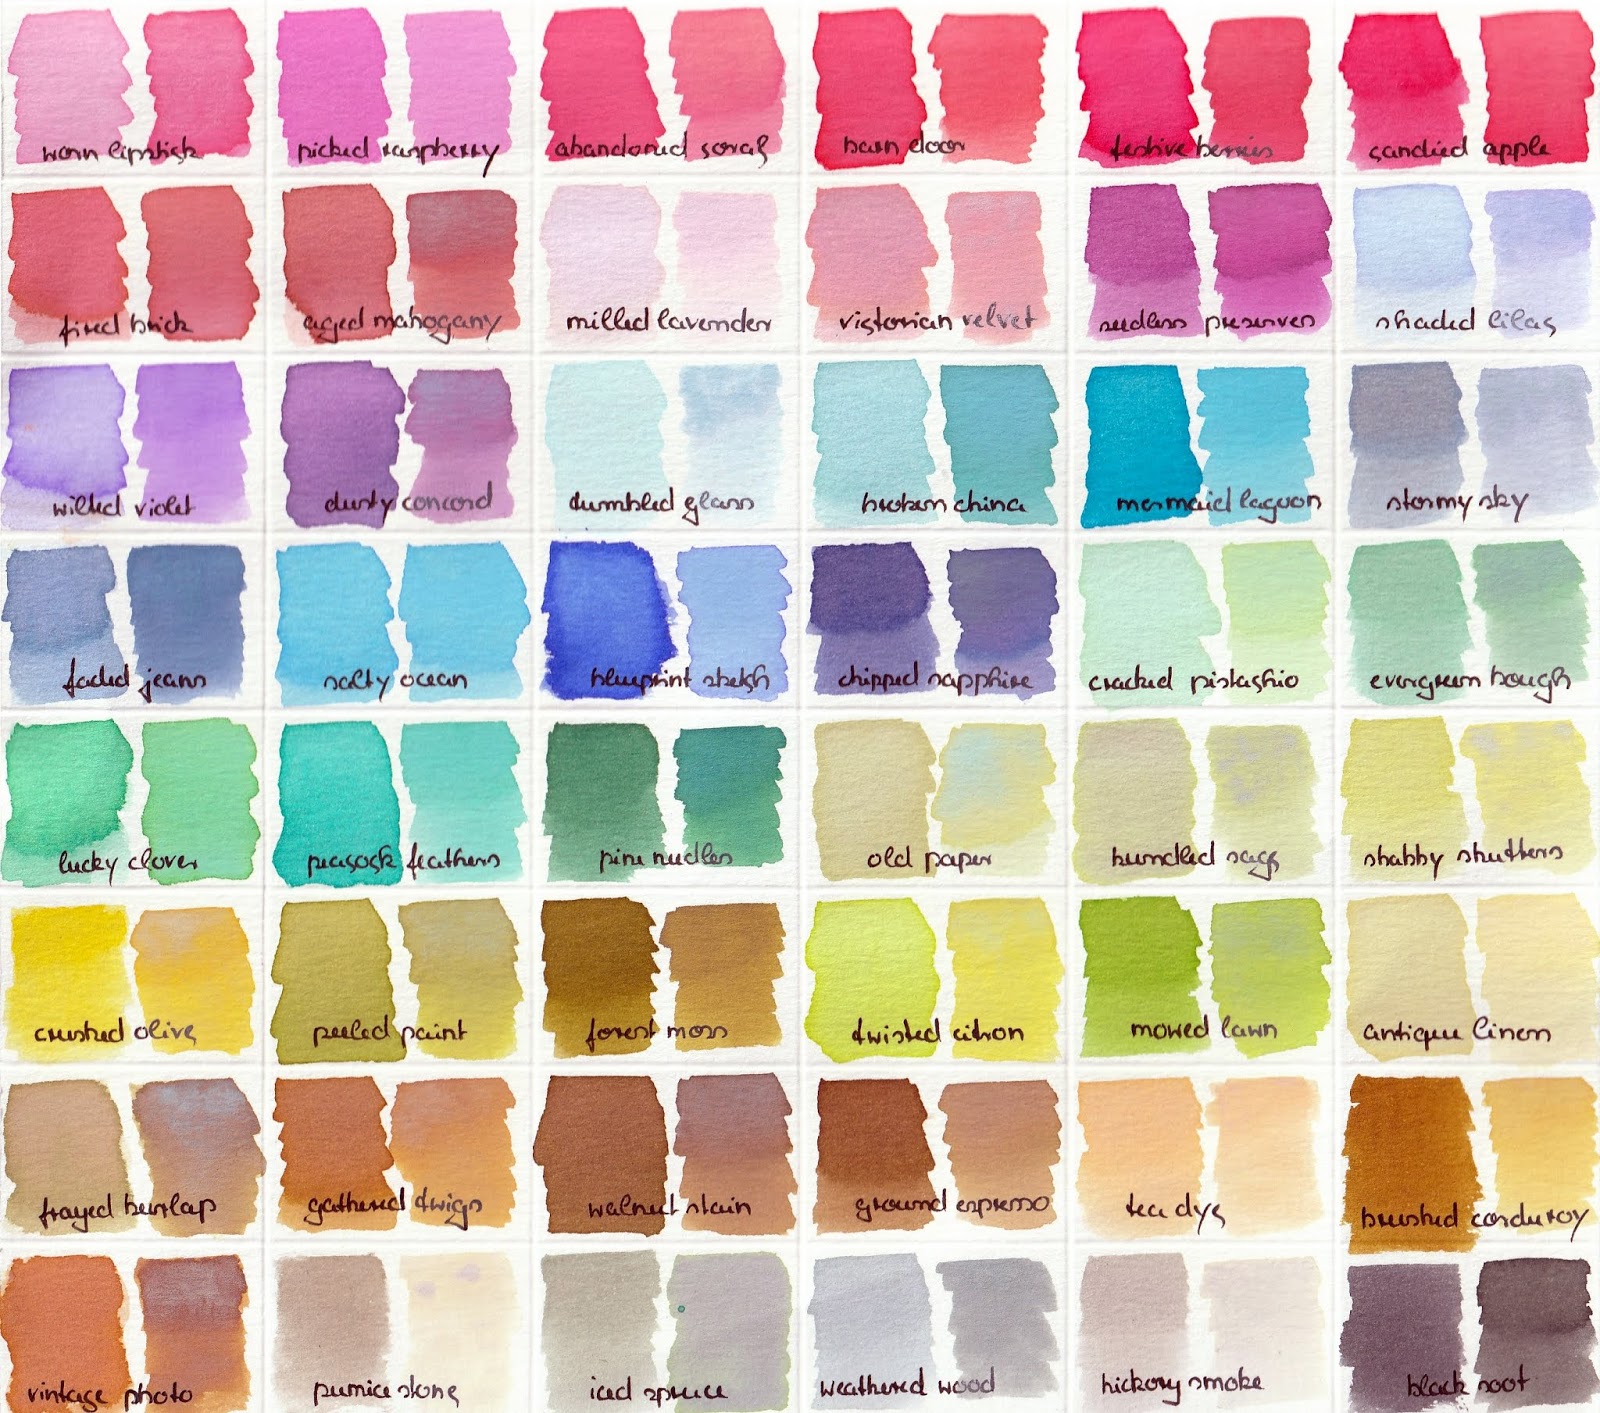 Ink Color Chart